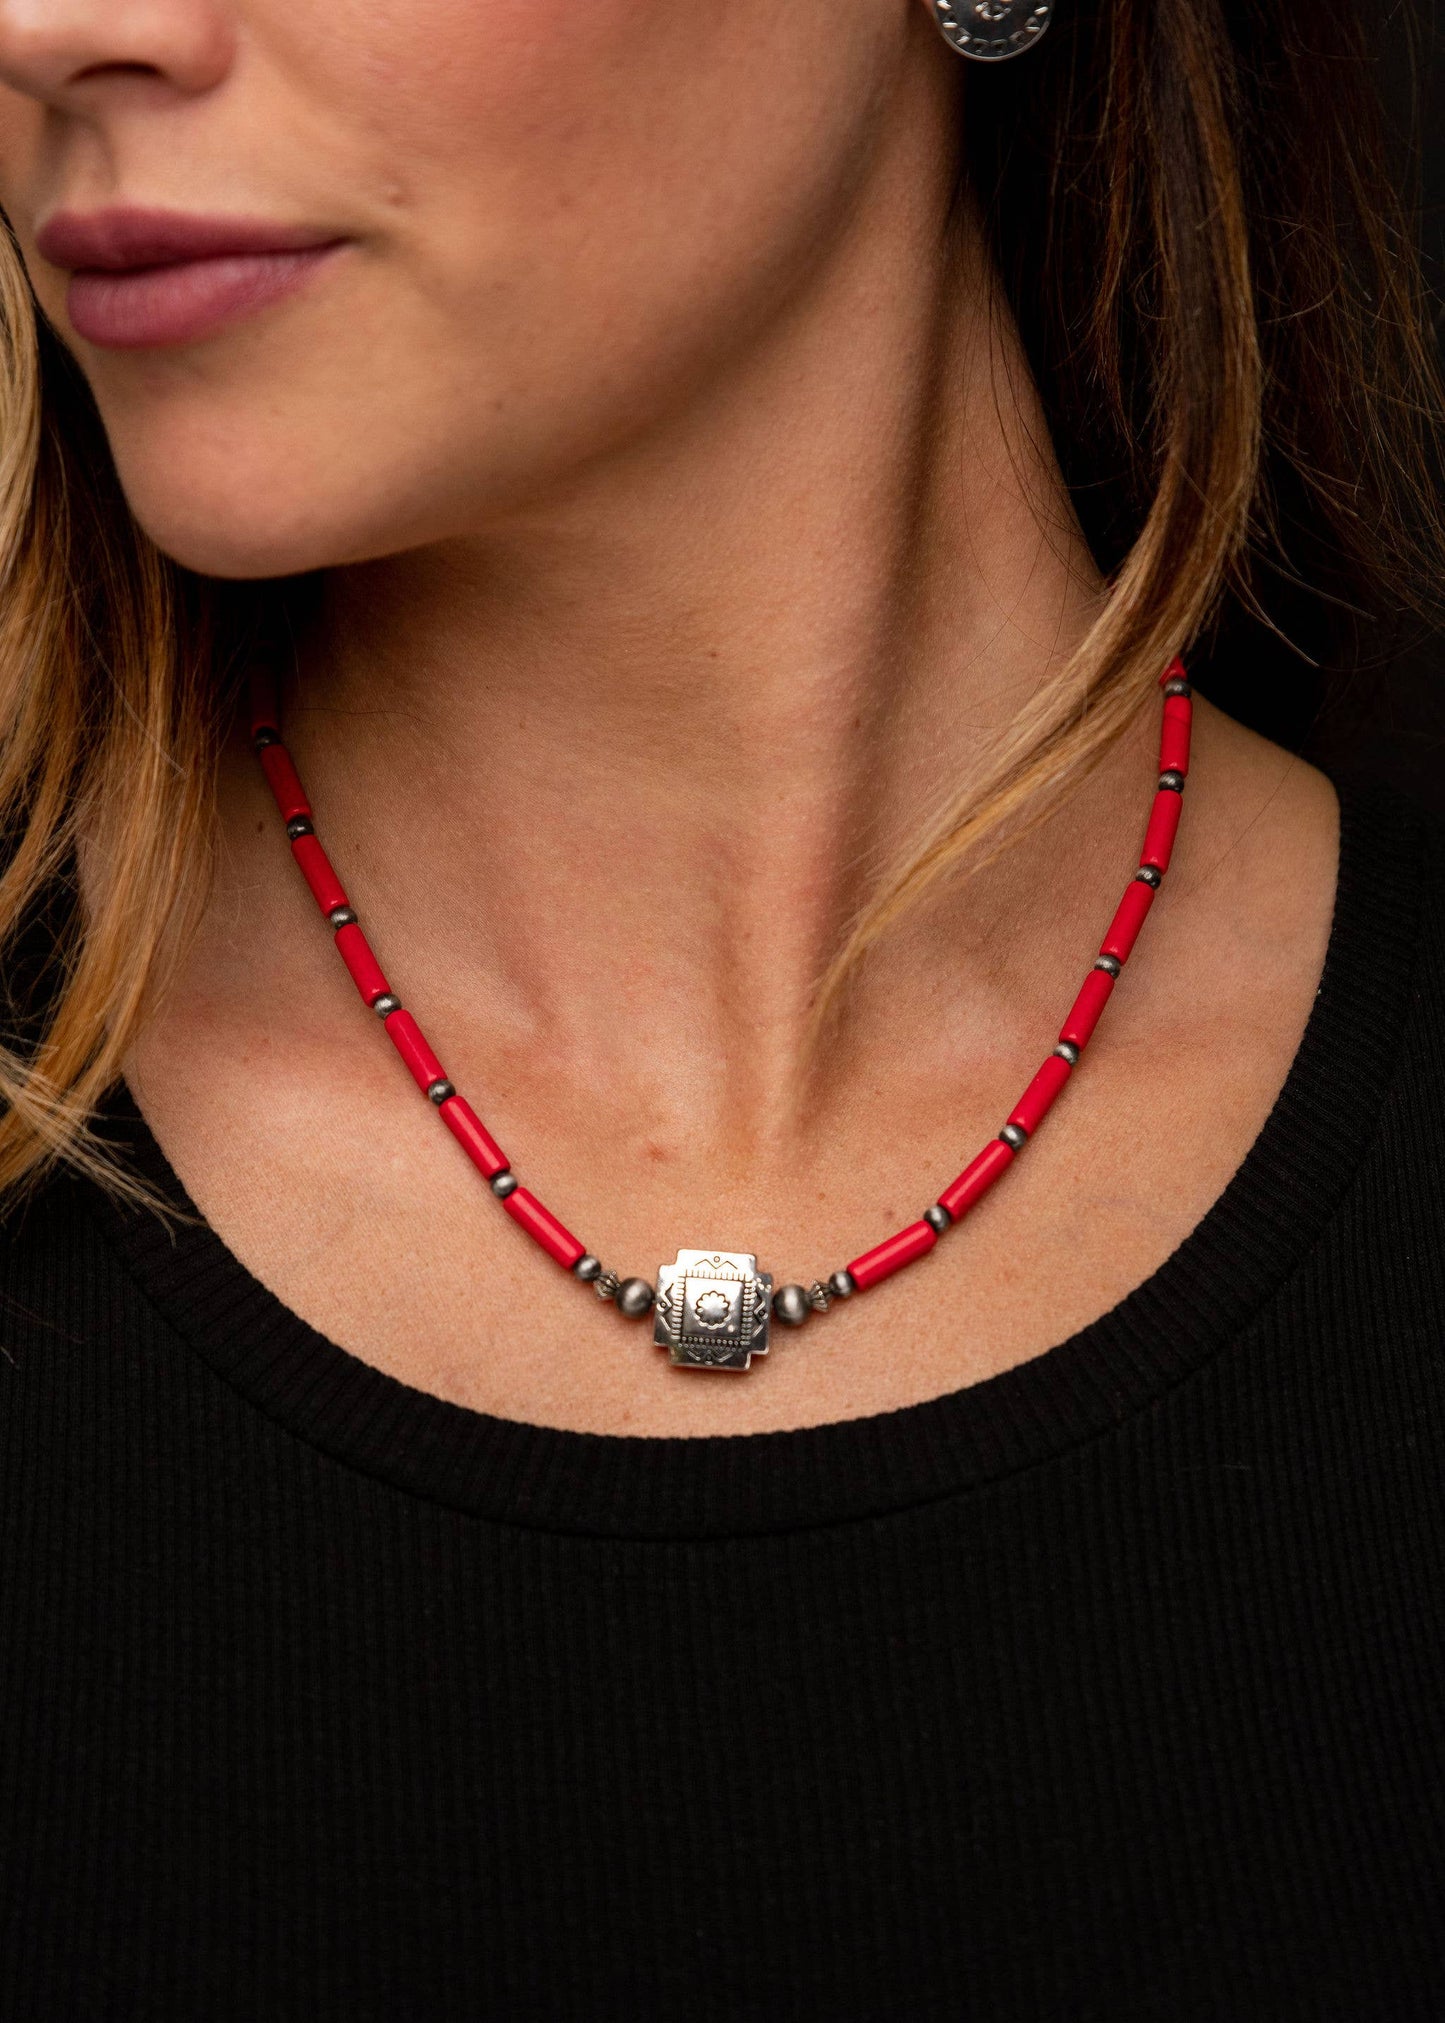 West & Co. - 16" Red Tube Bead Necklace with Southwestern Bead Accent